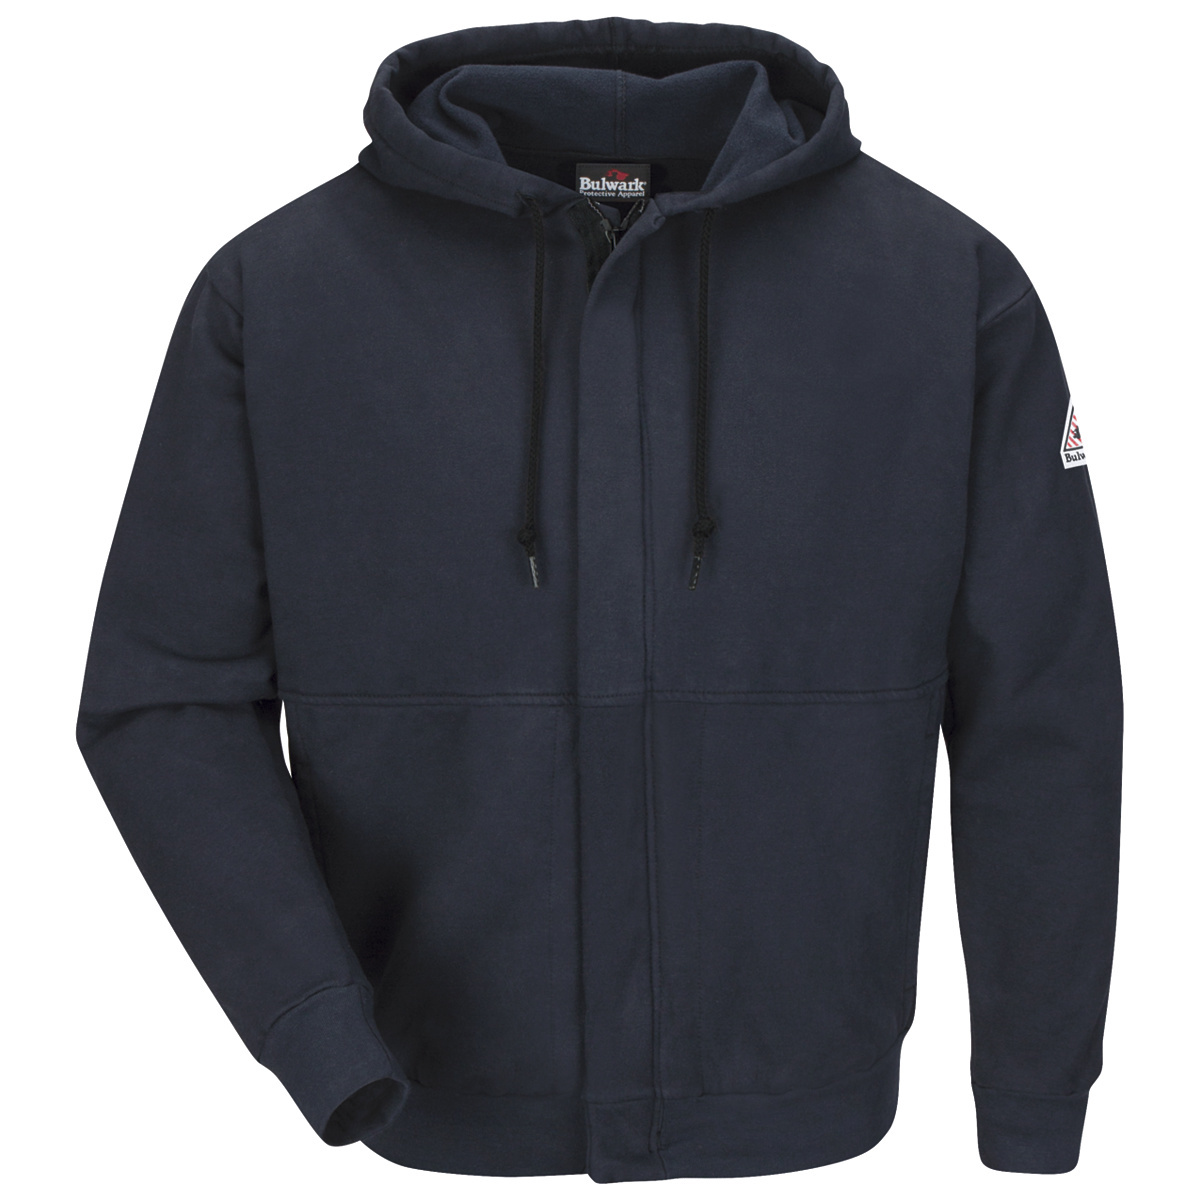 Bulwark® Large Tall Navy Blue Cotton/Spandex Brushed Fleece Flame Resistant Hooded Sweatshirt With Zipper Front Closure